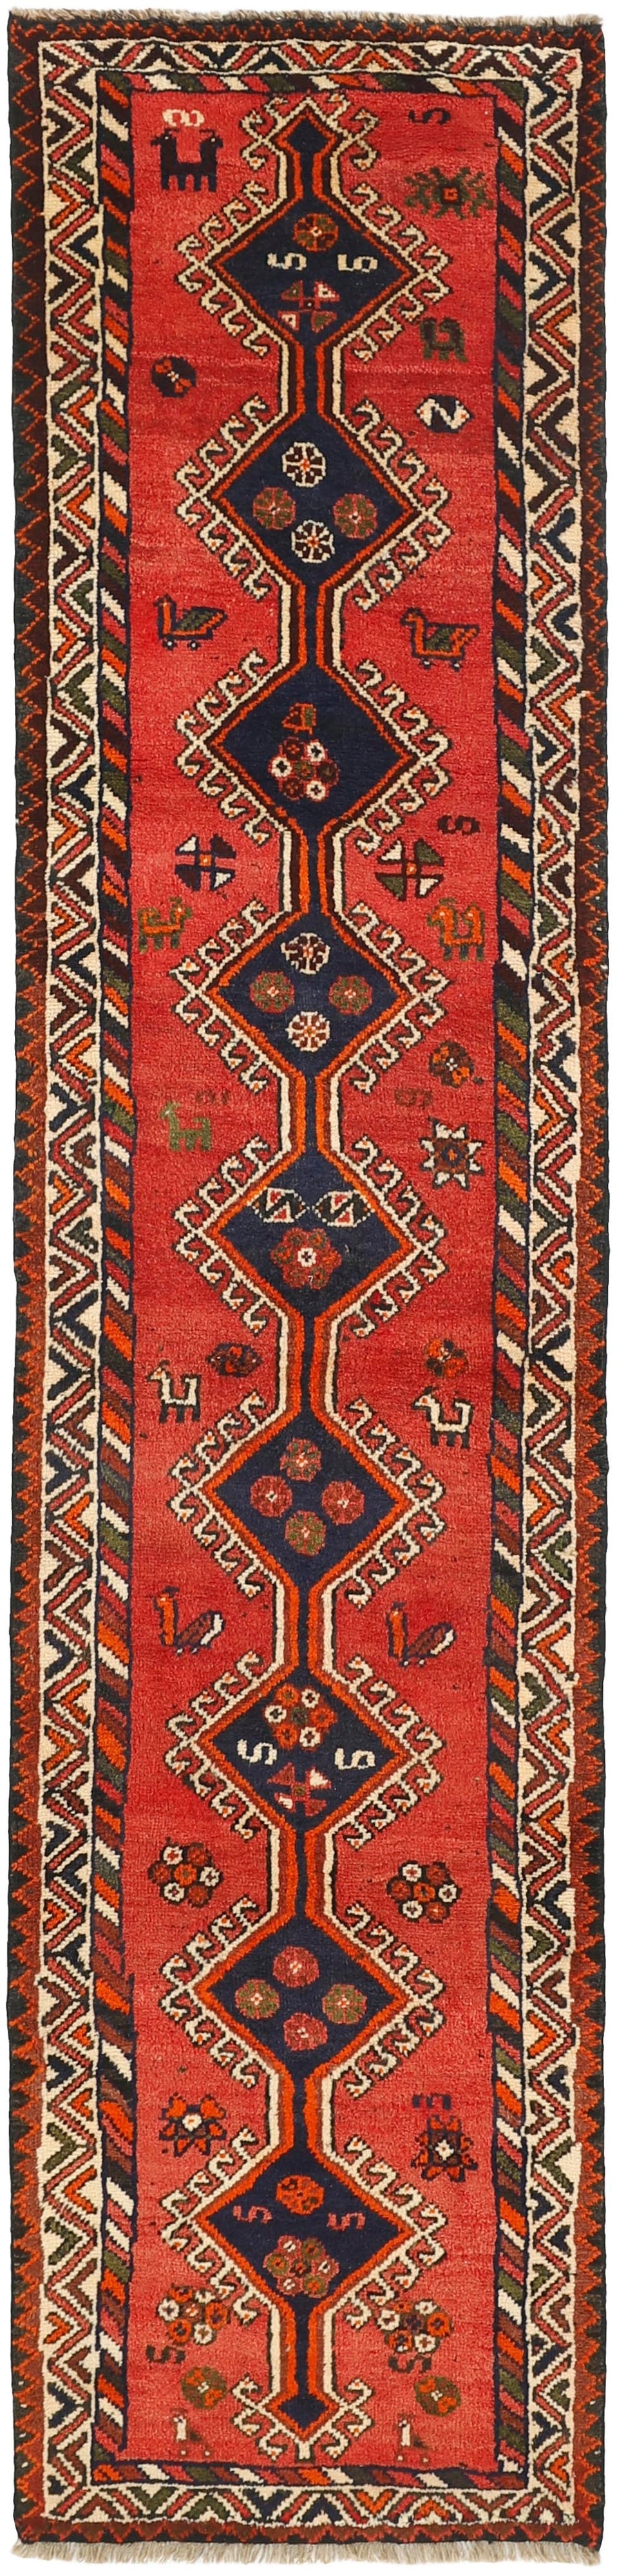 Authentic persian runner with a traditional tribal geometric pattern in red, brown and green